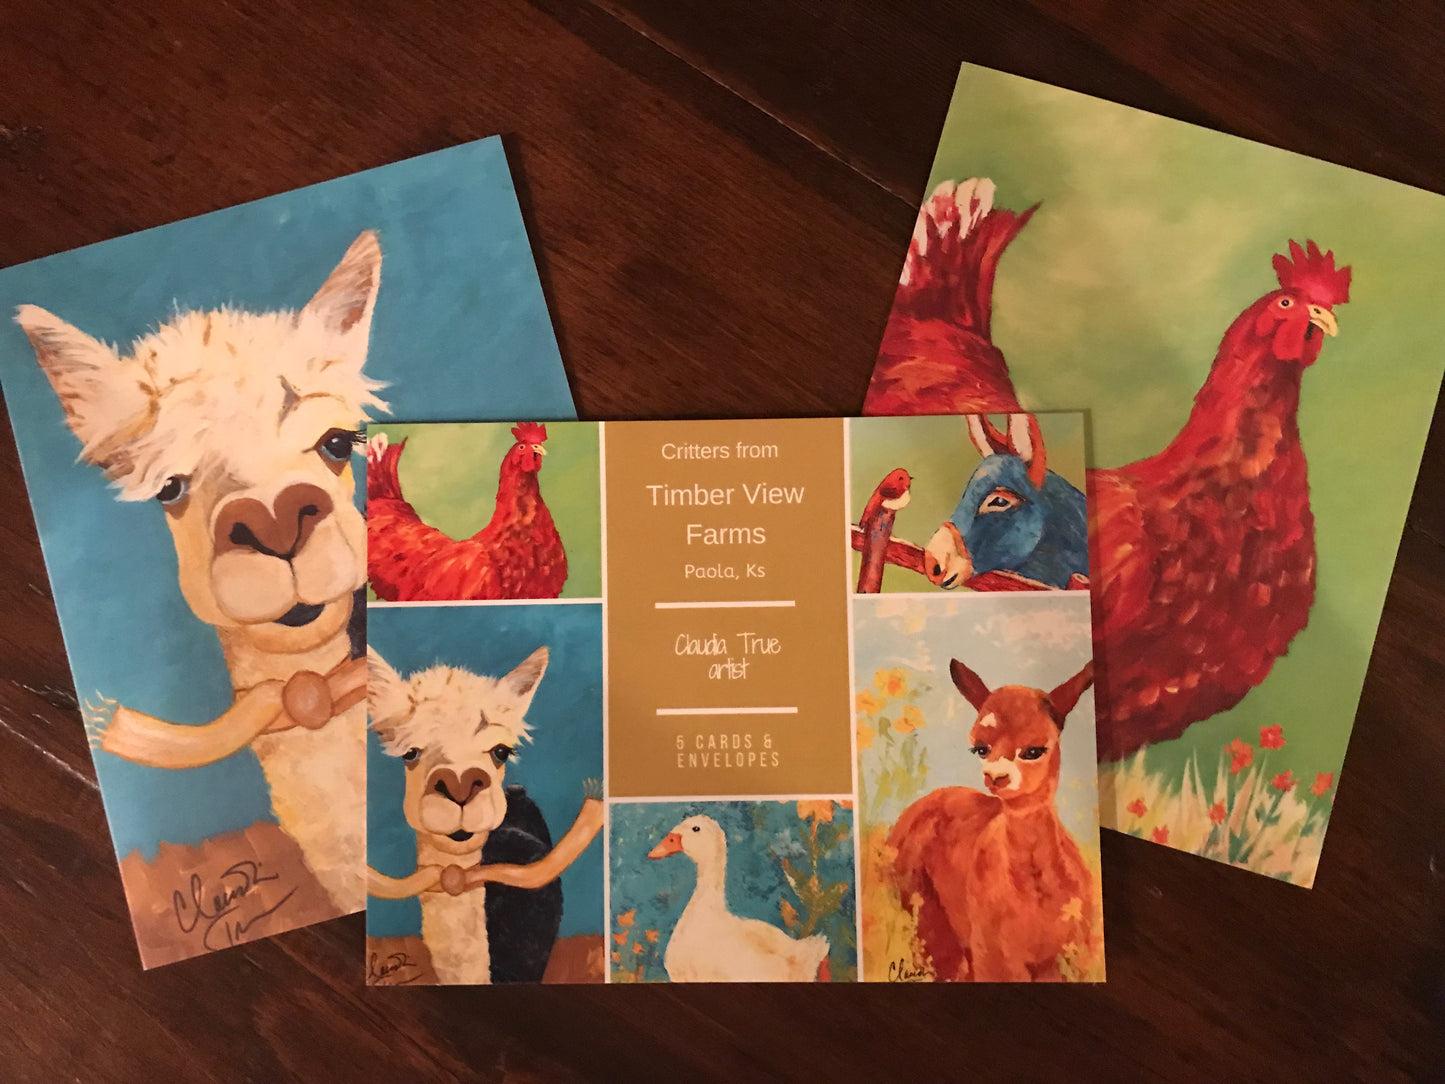 Critters of Timber View Farms Greeting Cards